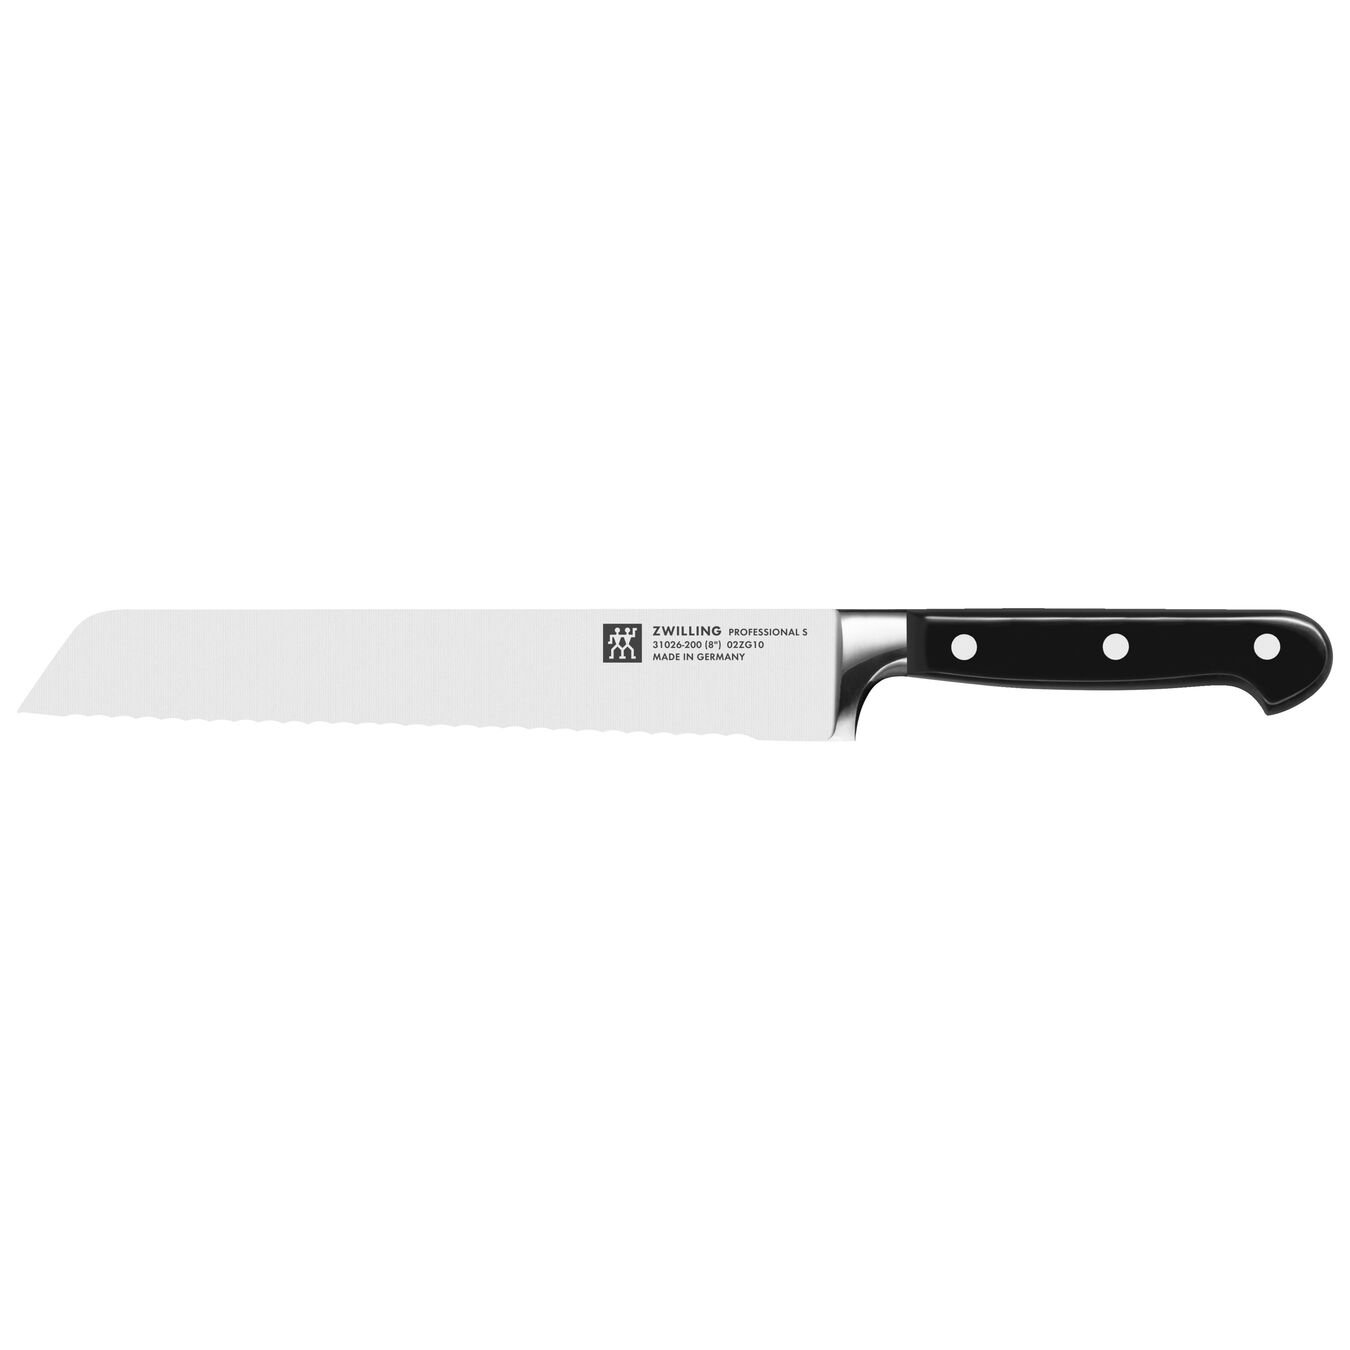 7-pc, Set with 17.5" Stainless Magnetic Knife Bar,,large 2